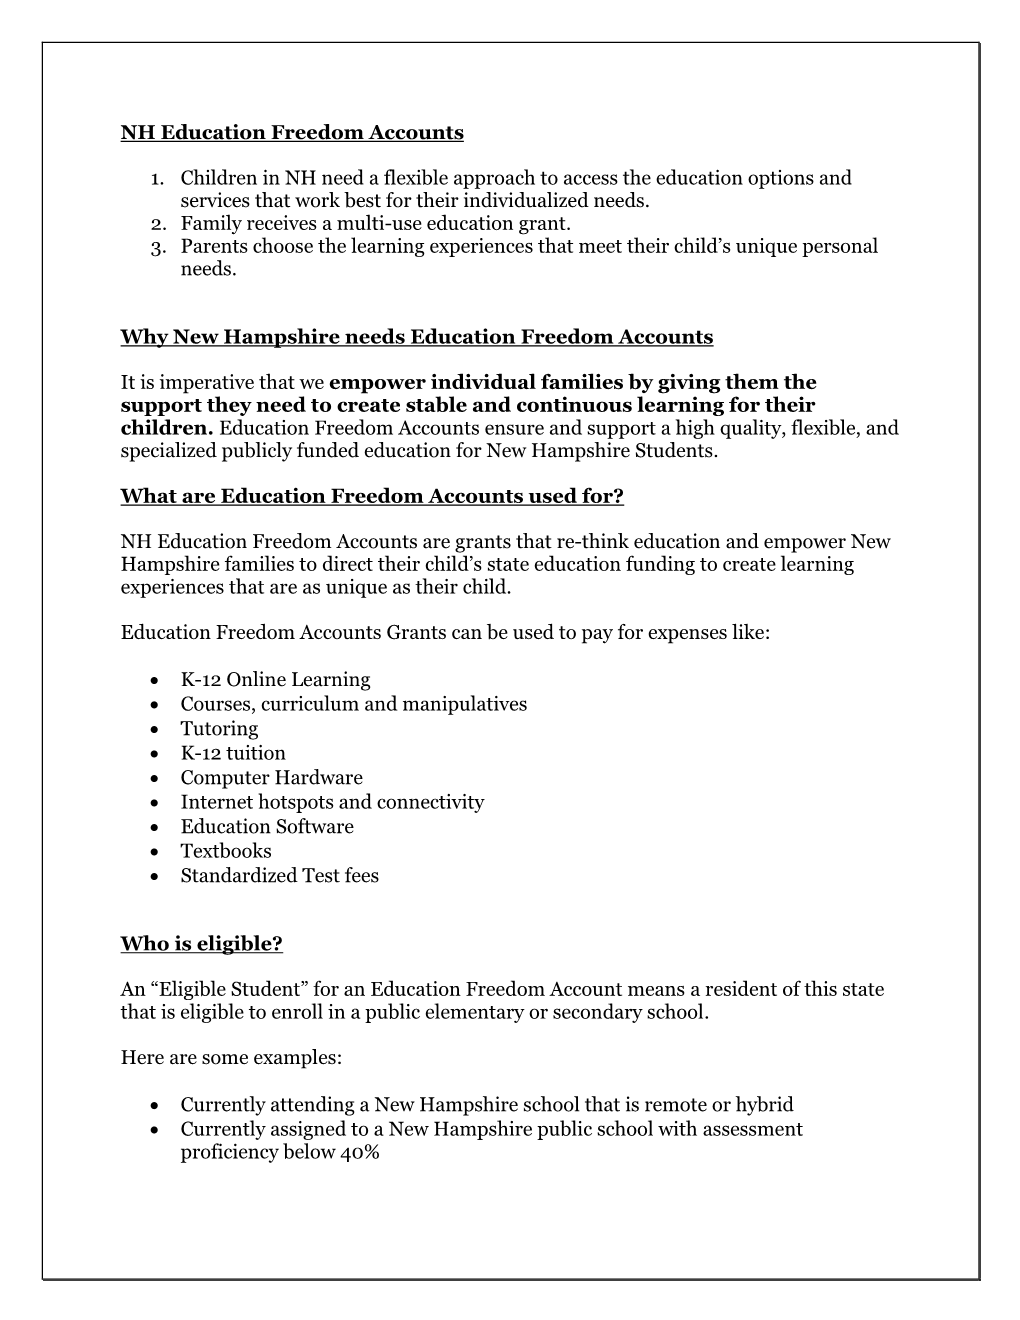 NH Education Freedom Accounts 1. Children in NH Need a Flexible